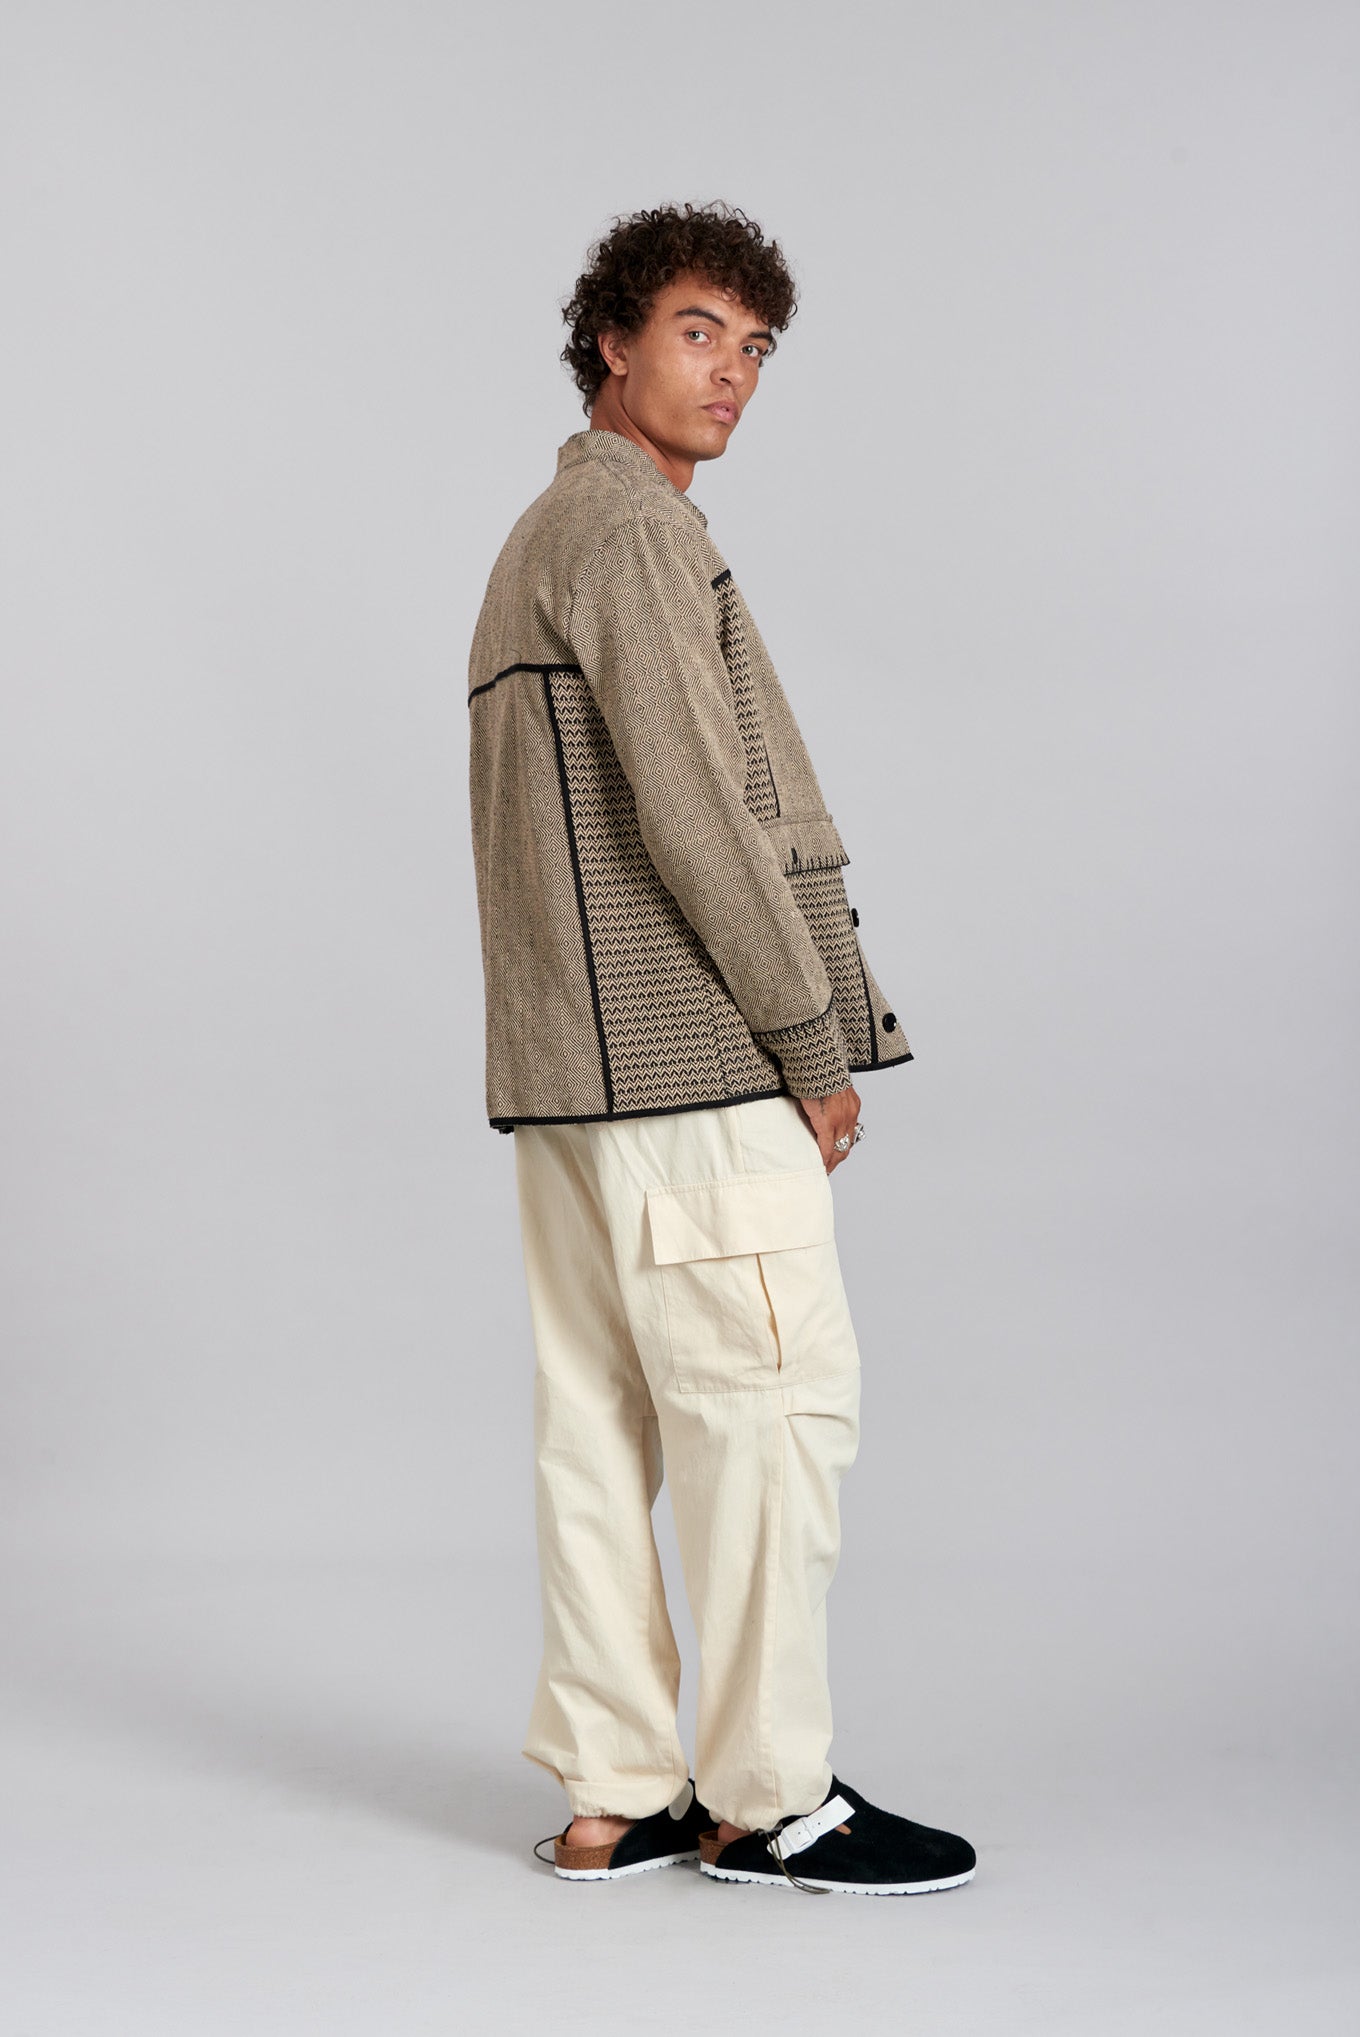 YULIO - Hand Loomed Cotton Patchwork Jacket